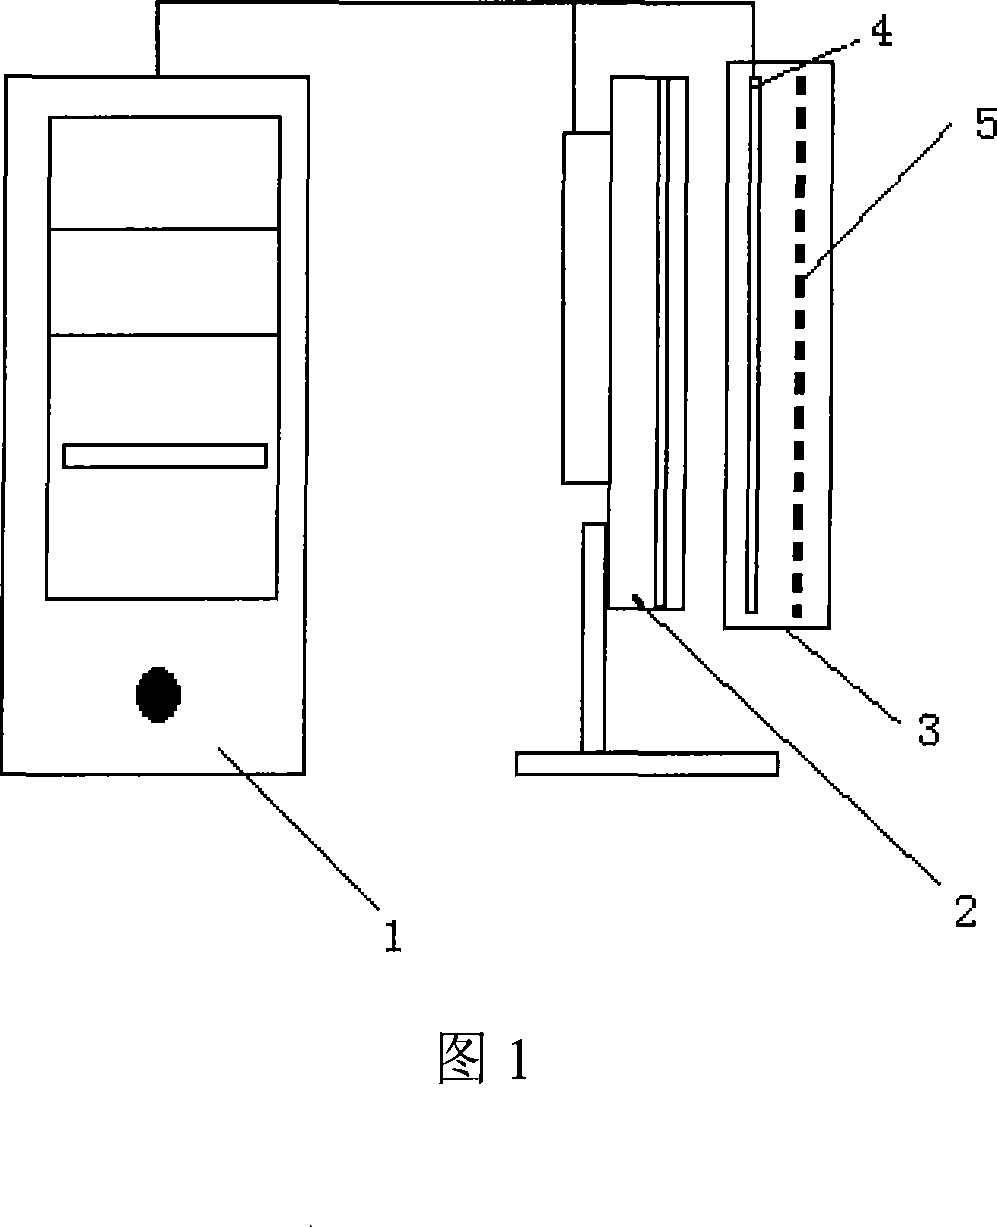 Bare hole visible liquid crystal raster stereoscopic picture display apparatus